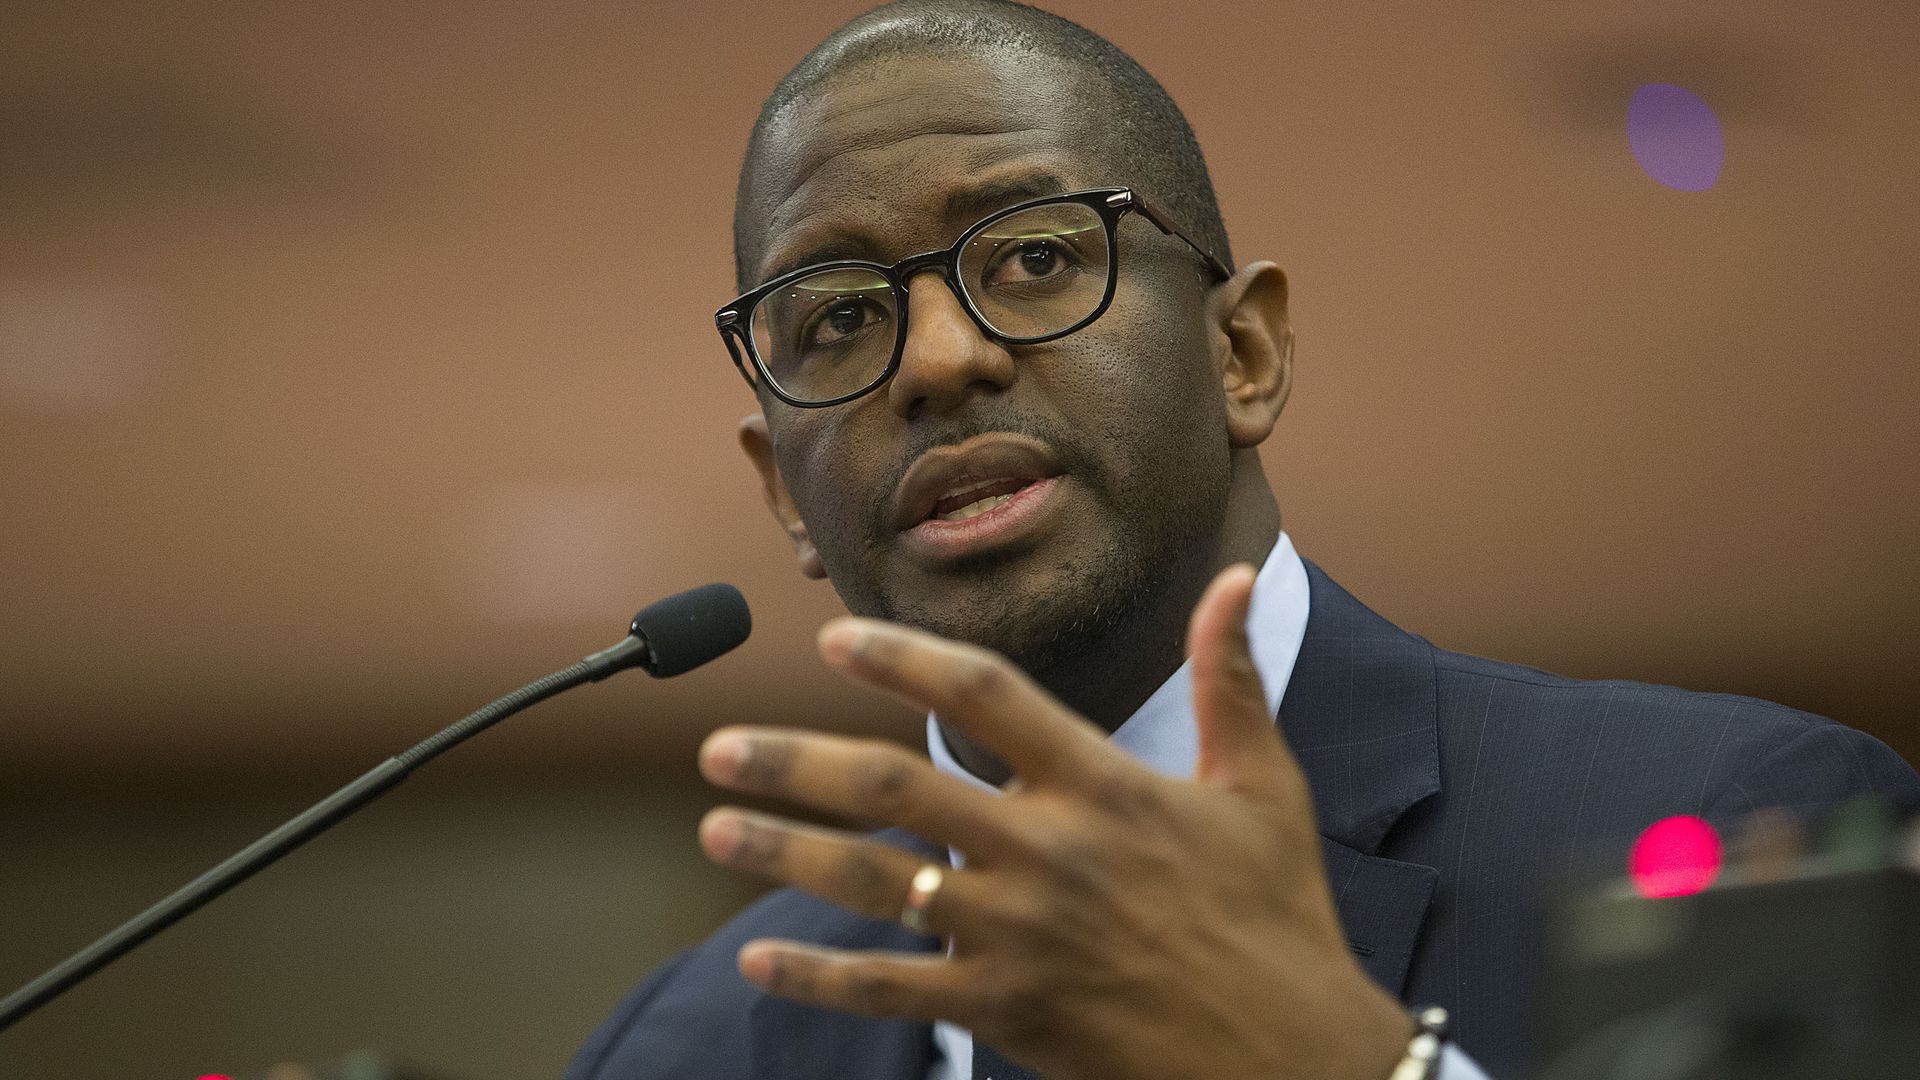 Gillum speaking into a microphone